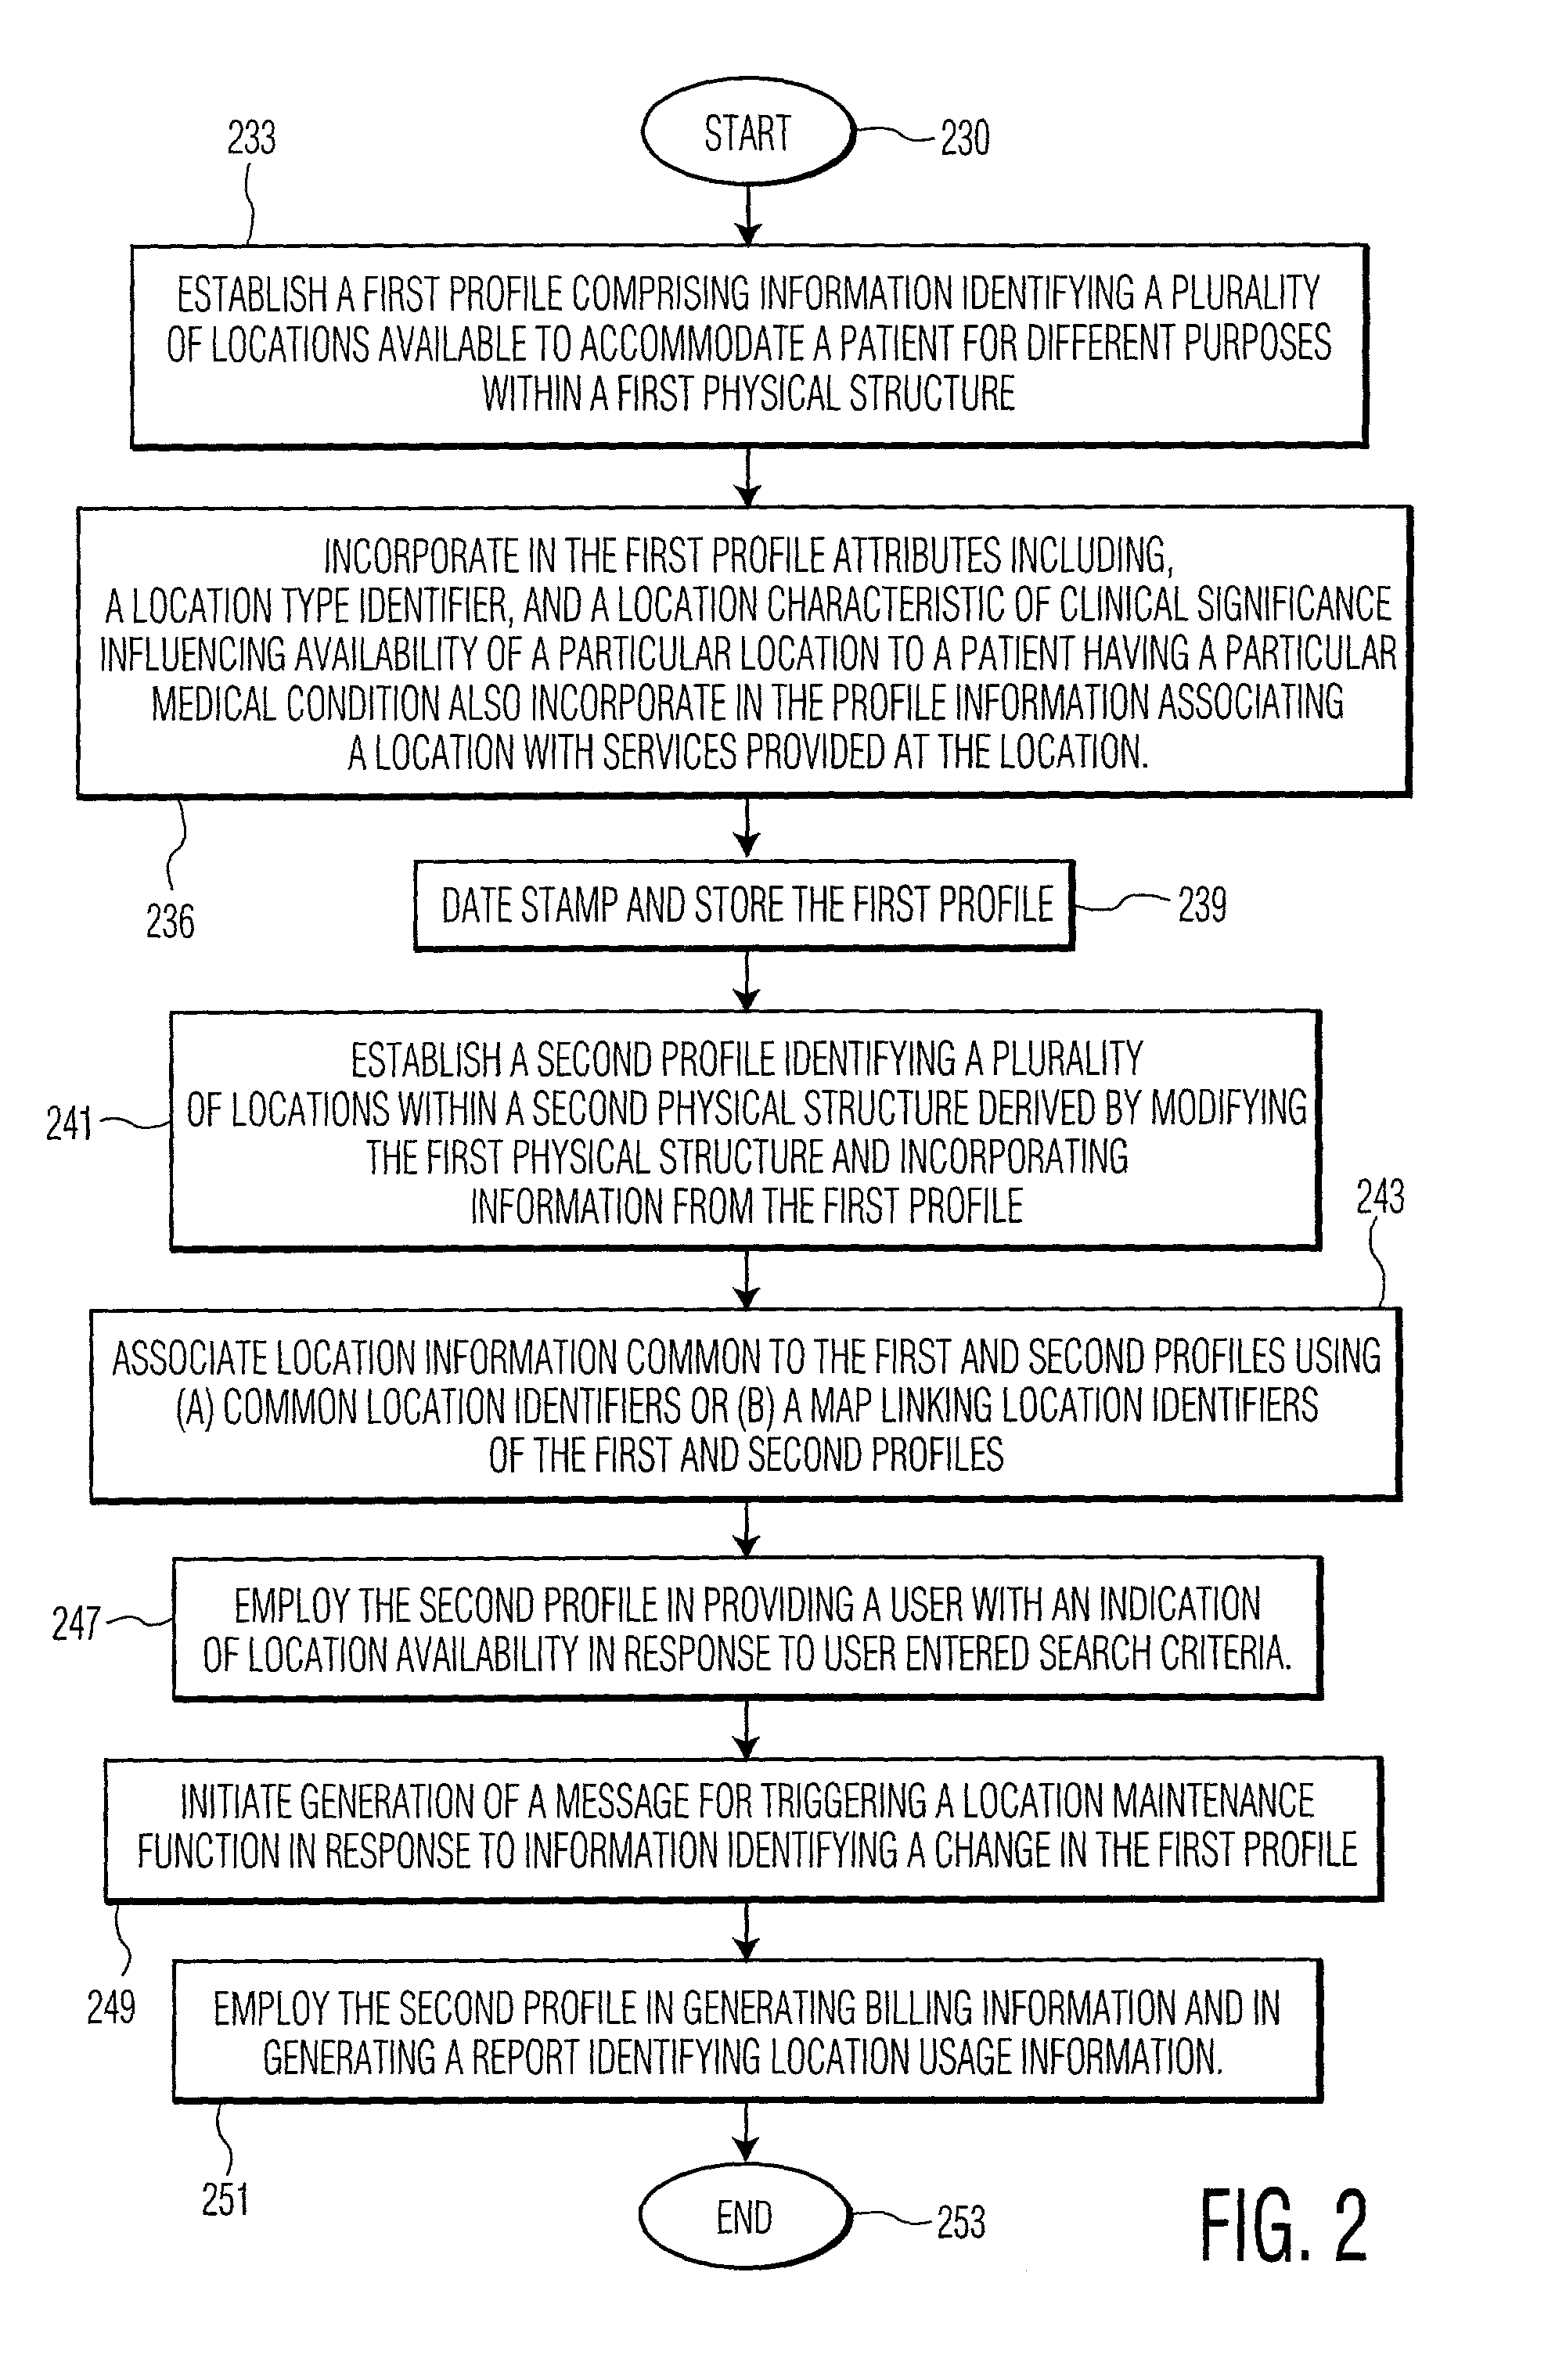 Resource monitoring and user interface system for processing location related information in a healthcare enterprise